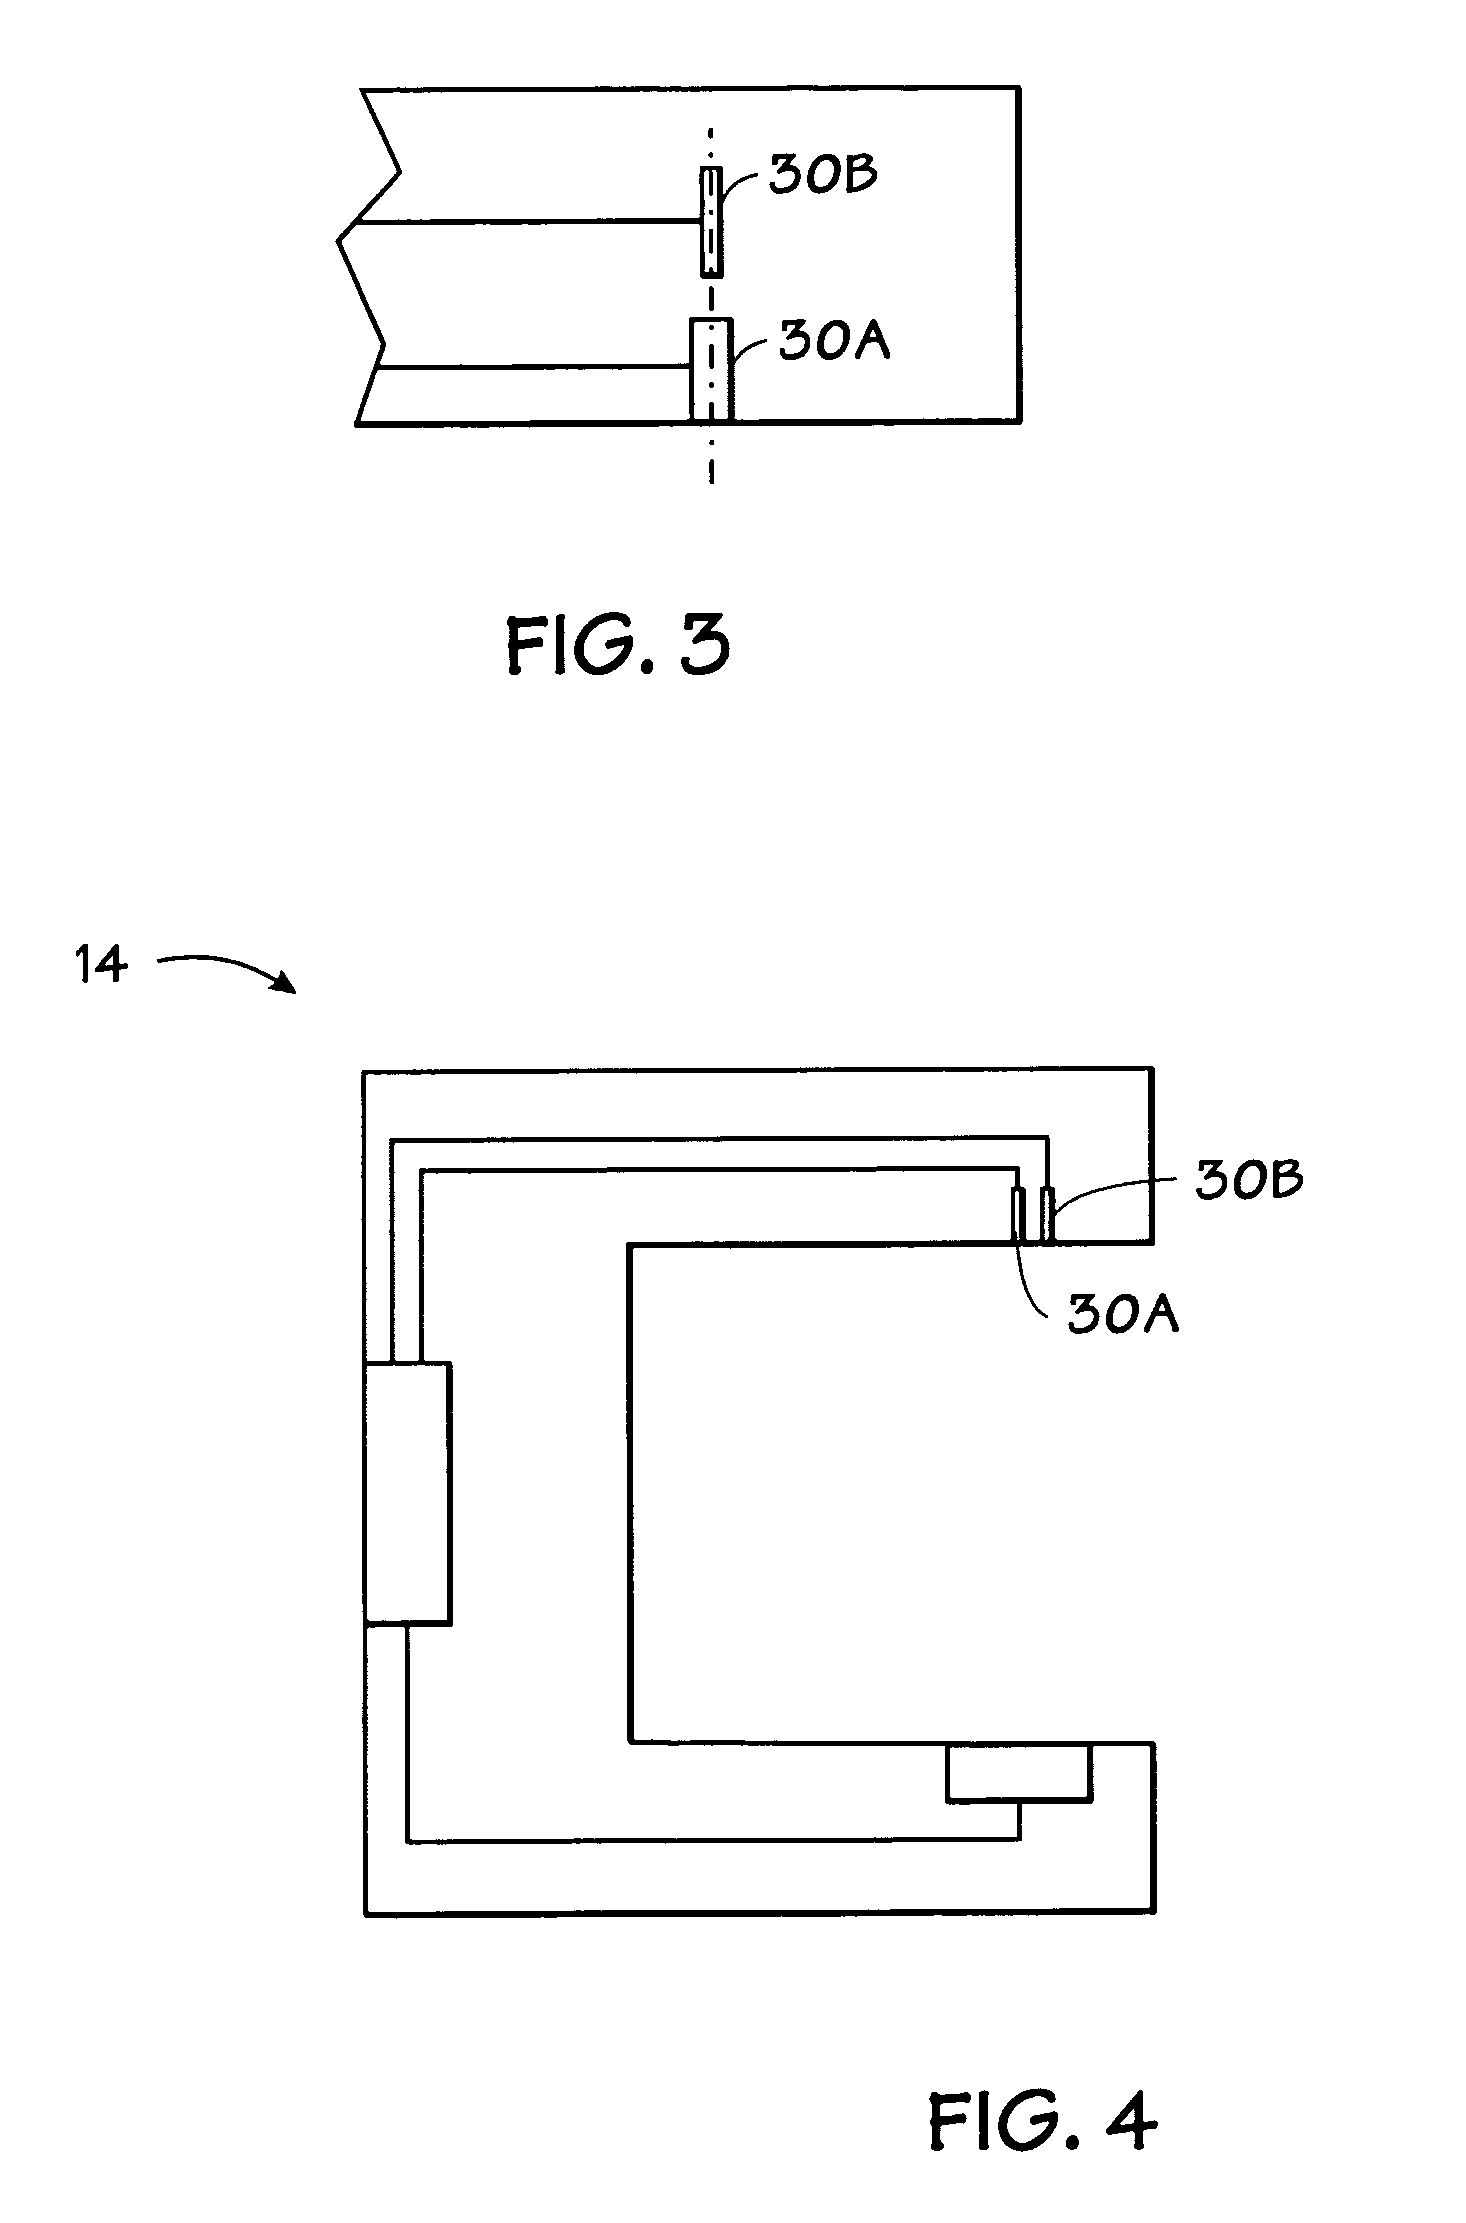 System and method for practicing spectrophotometry using light emitting nanostructure devices